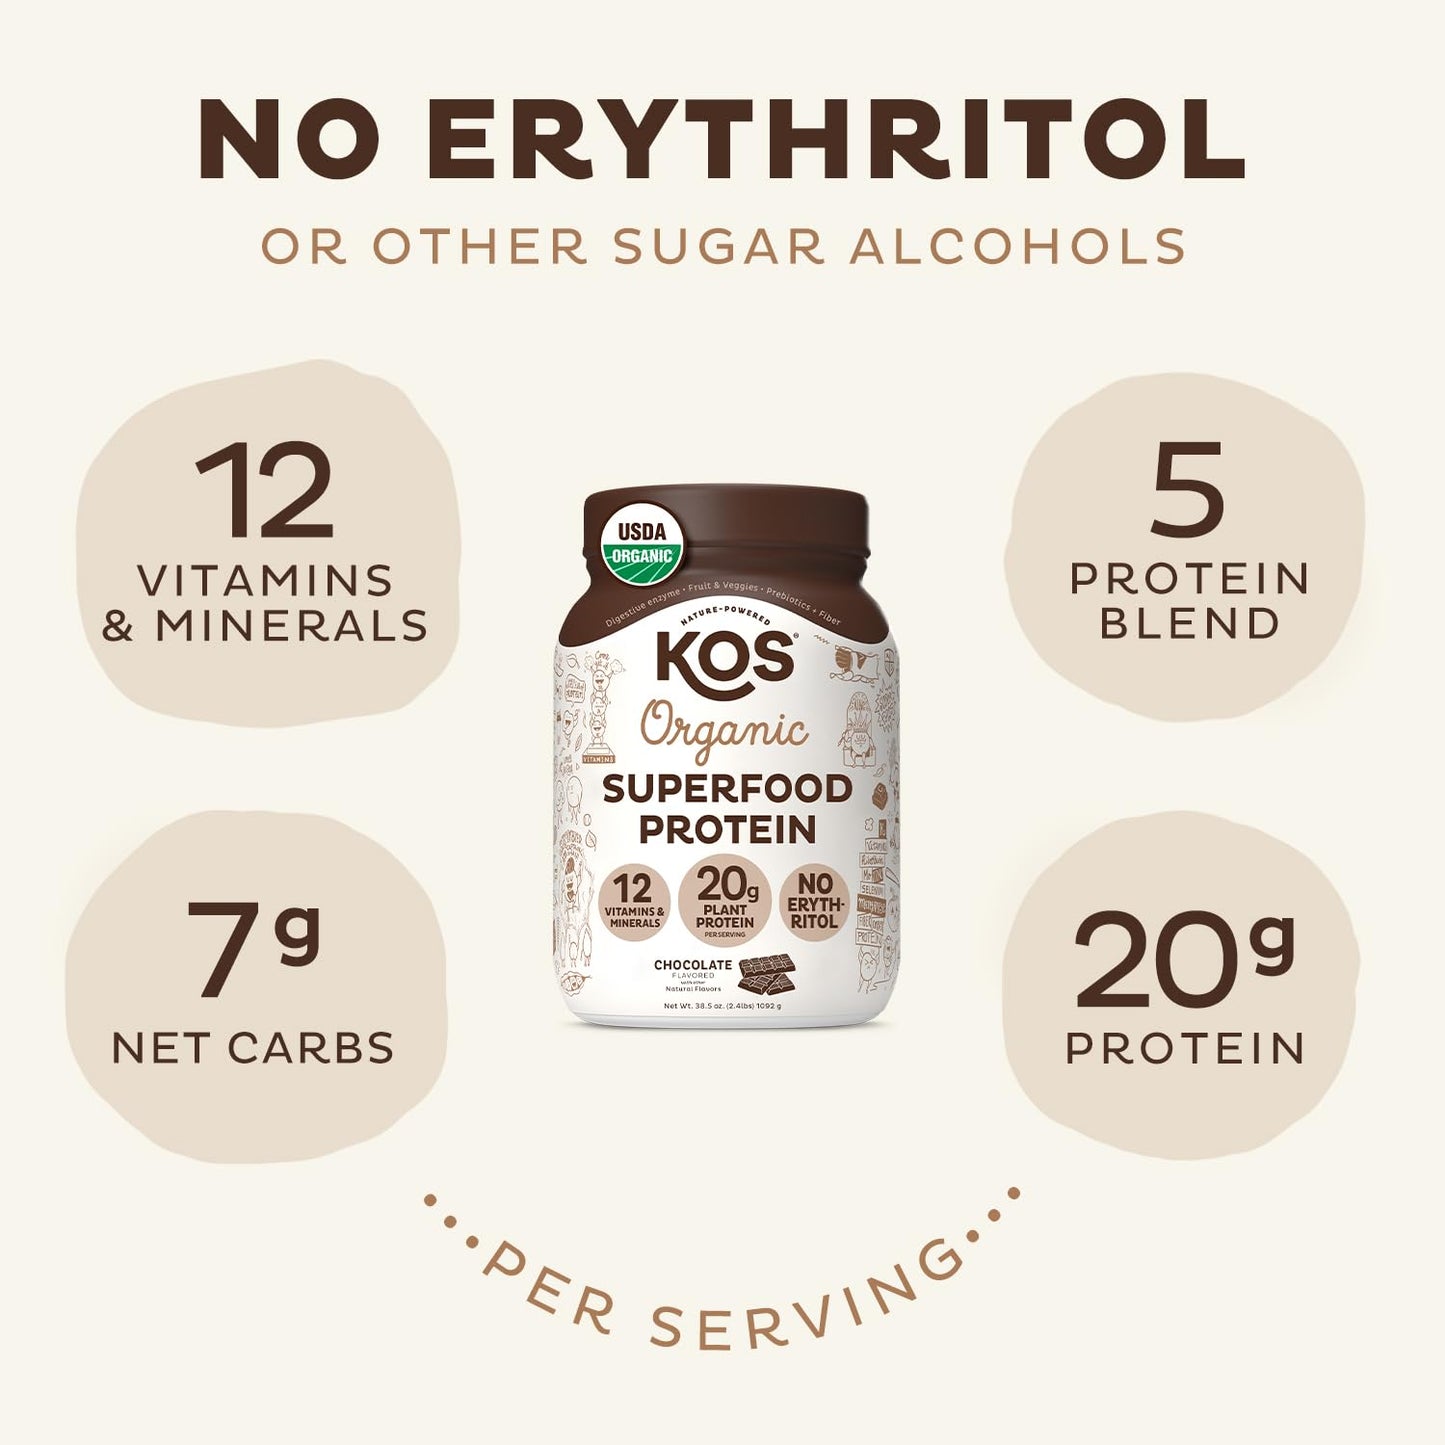 KOS Vegan Protein Powder Erythritol Free, Chocolate - Organic Pea Protein Blend, Plant Based Superfood Rich in Vitamins & Minerals - Keto, Dairy Free - Meal Replacement for Women & Men, 28 Servings